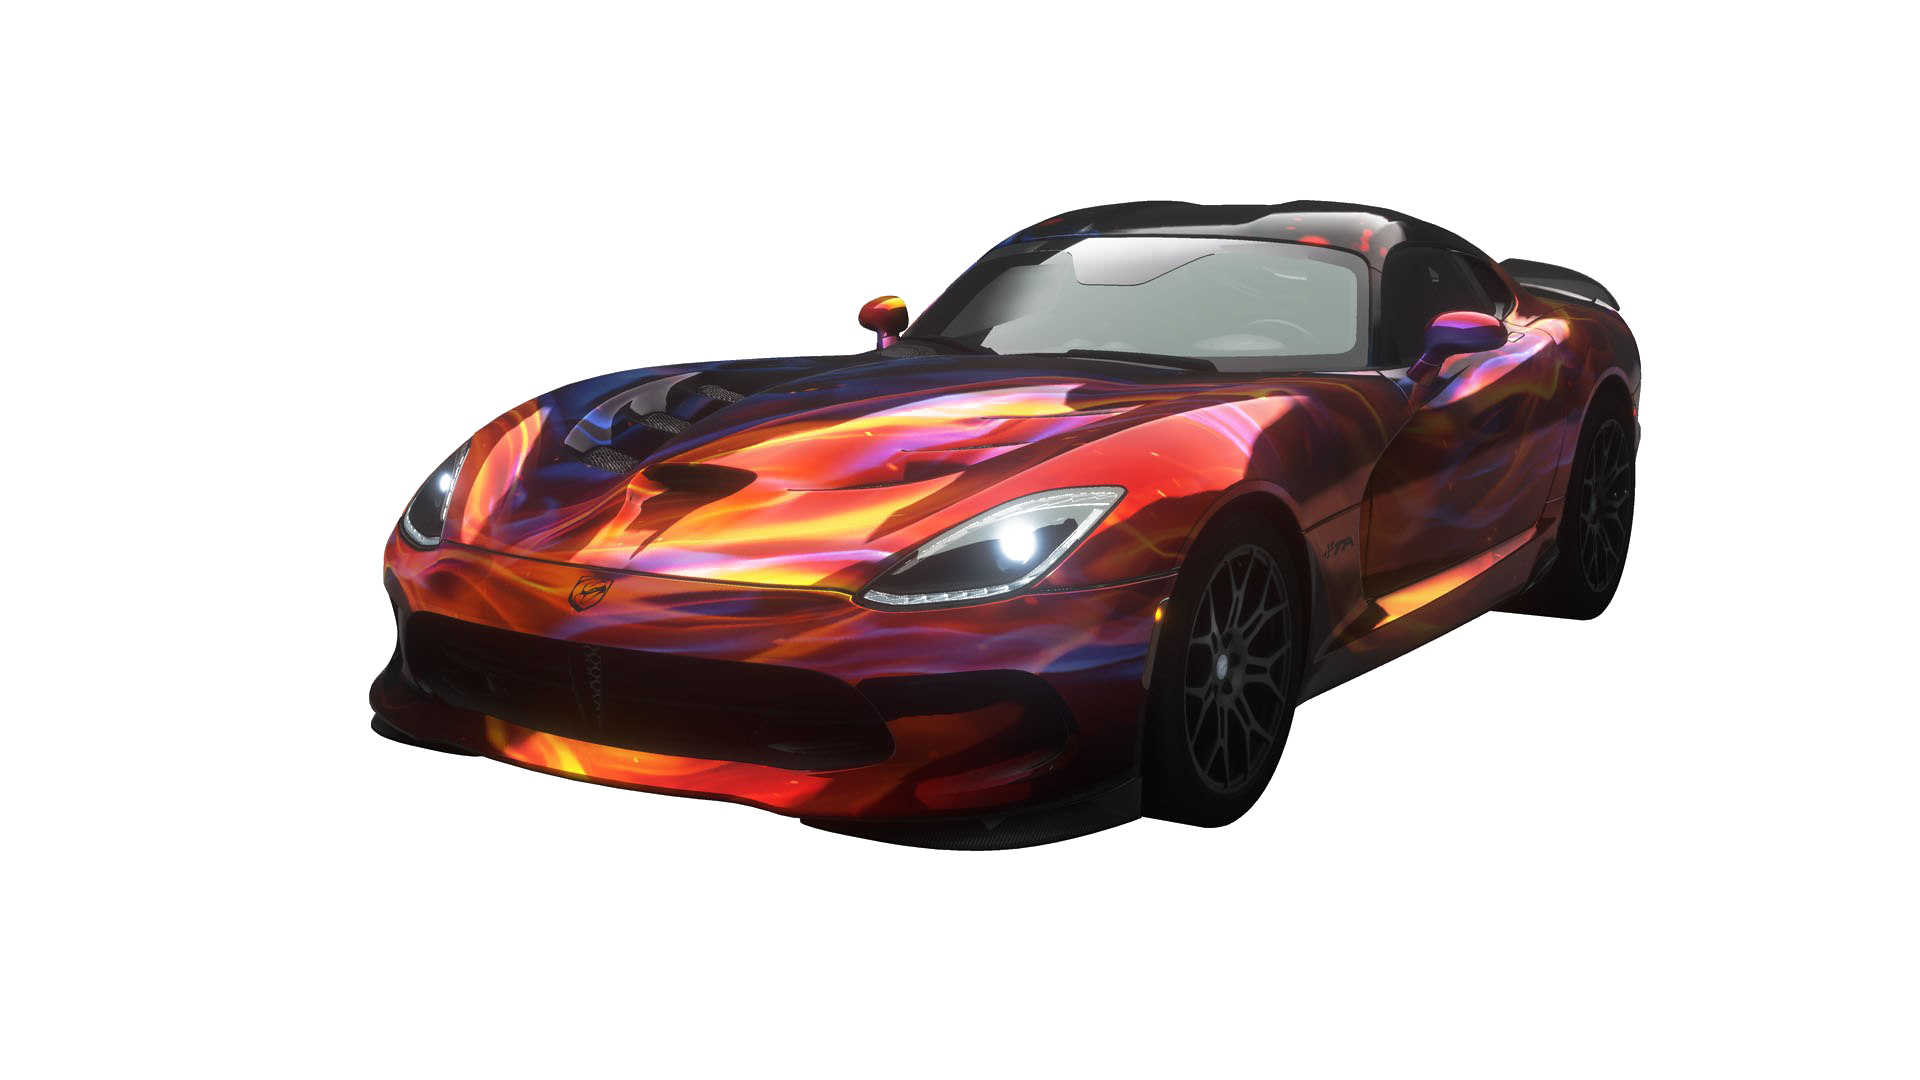 A Sports Car With A Flame Design